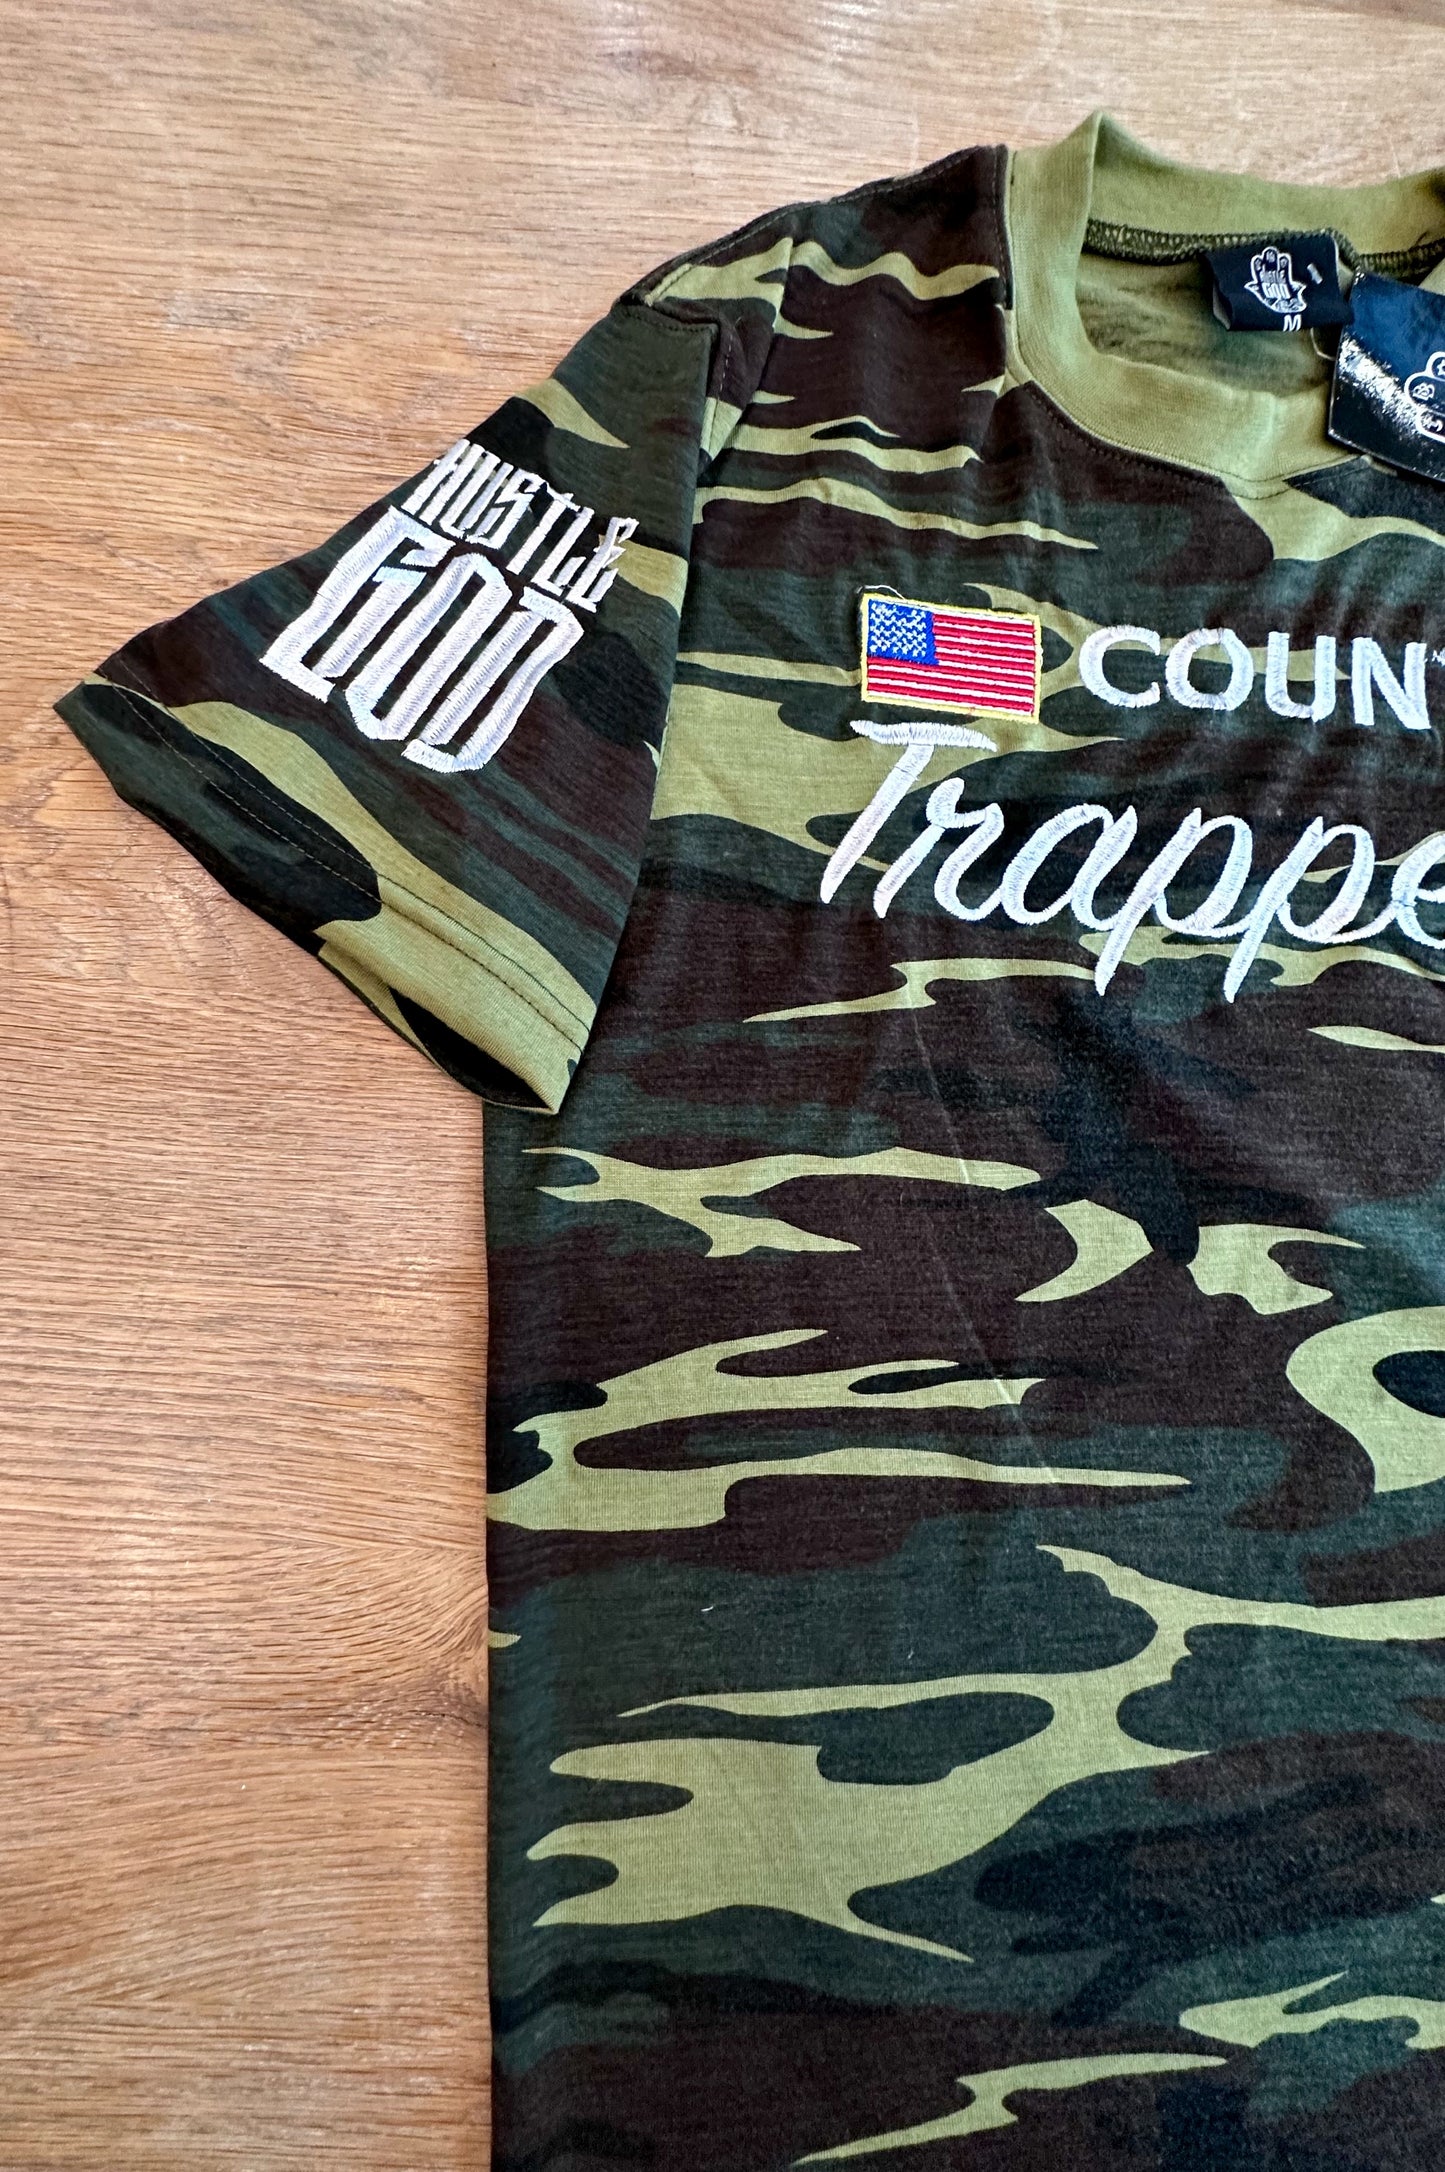 Country Trapper Camo T-Shirt (Fitted)Recommended One Size Larger Than You Usually Wear For More Casual Fit)